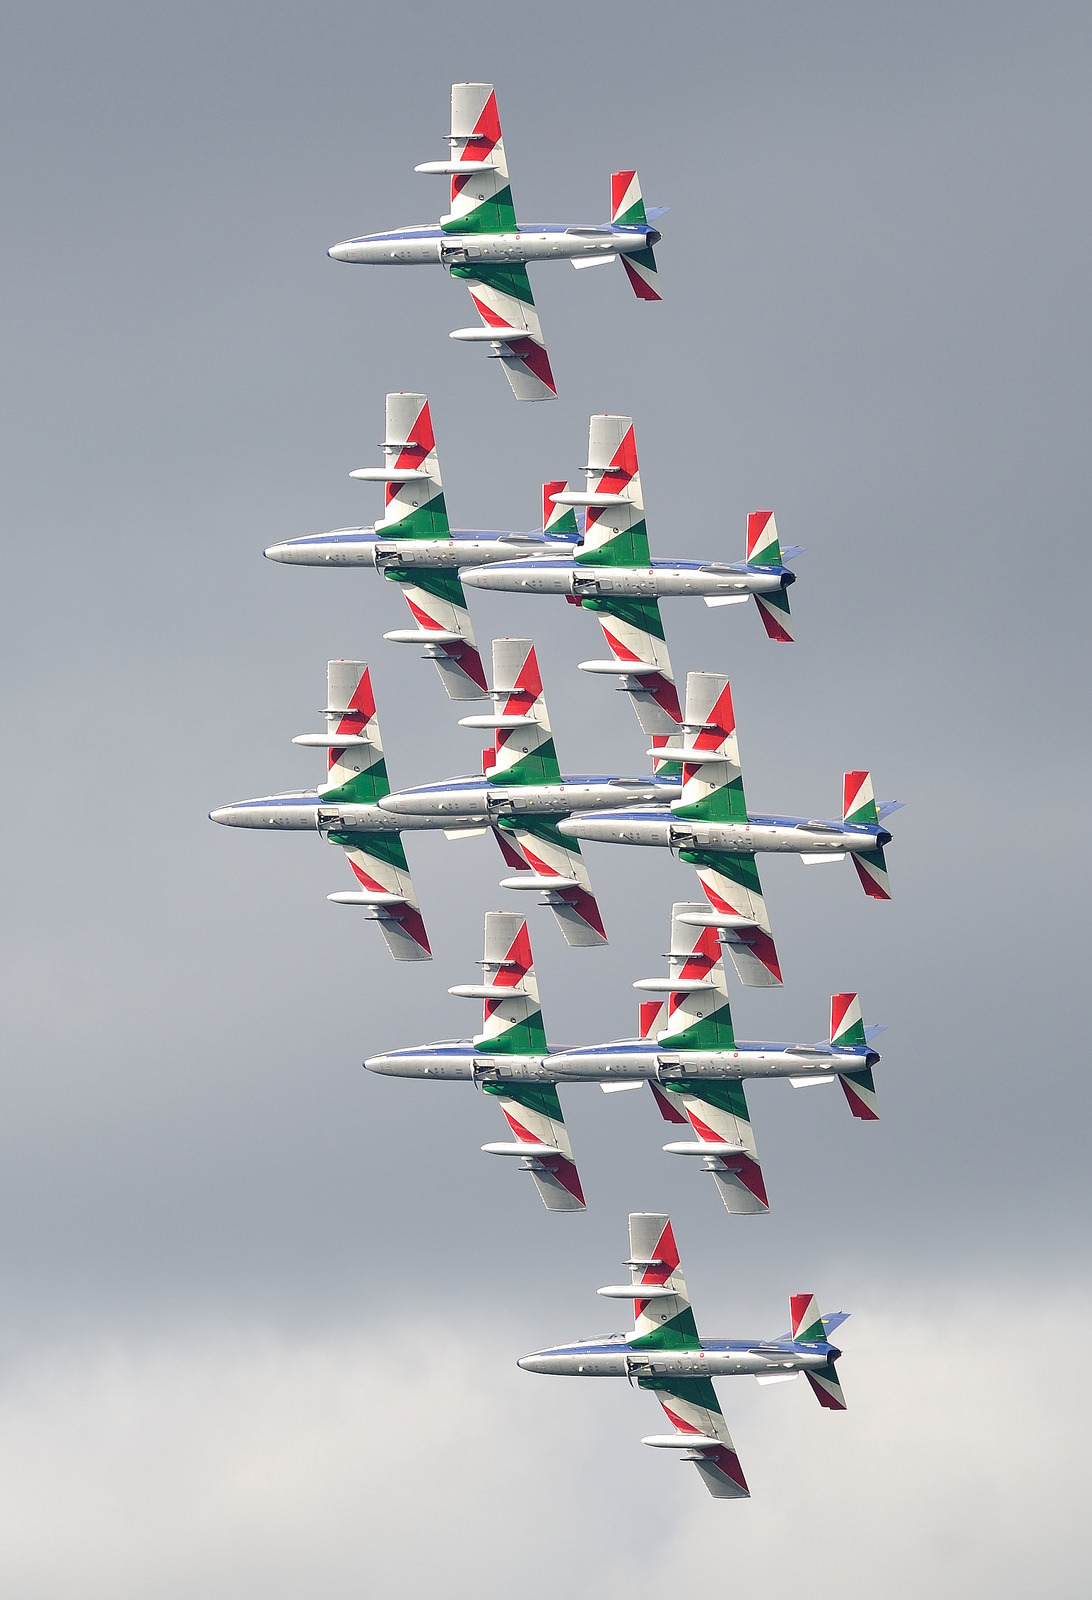 I haven’t featured the boys in red, white, and green in some time. I am of course talking about the Frecce Tricolori, Italy’s own military display team. Photo by Jez B.